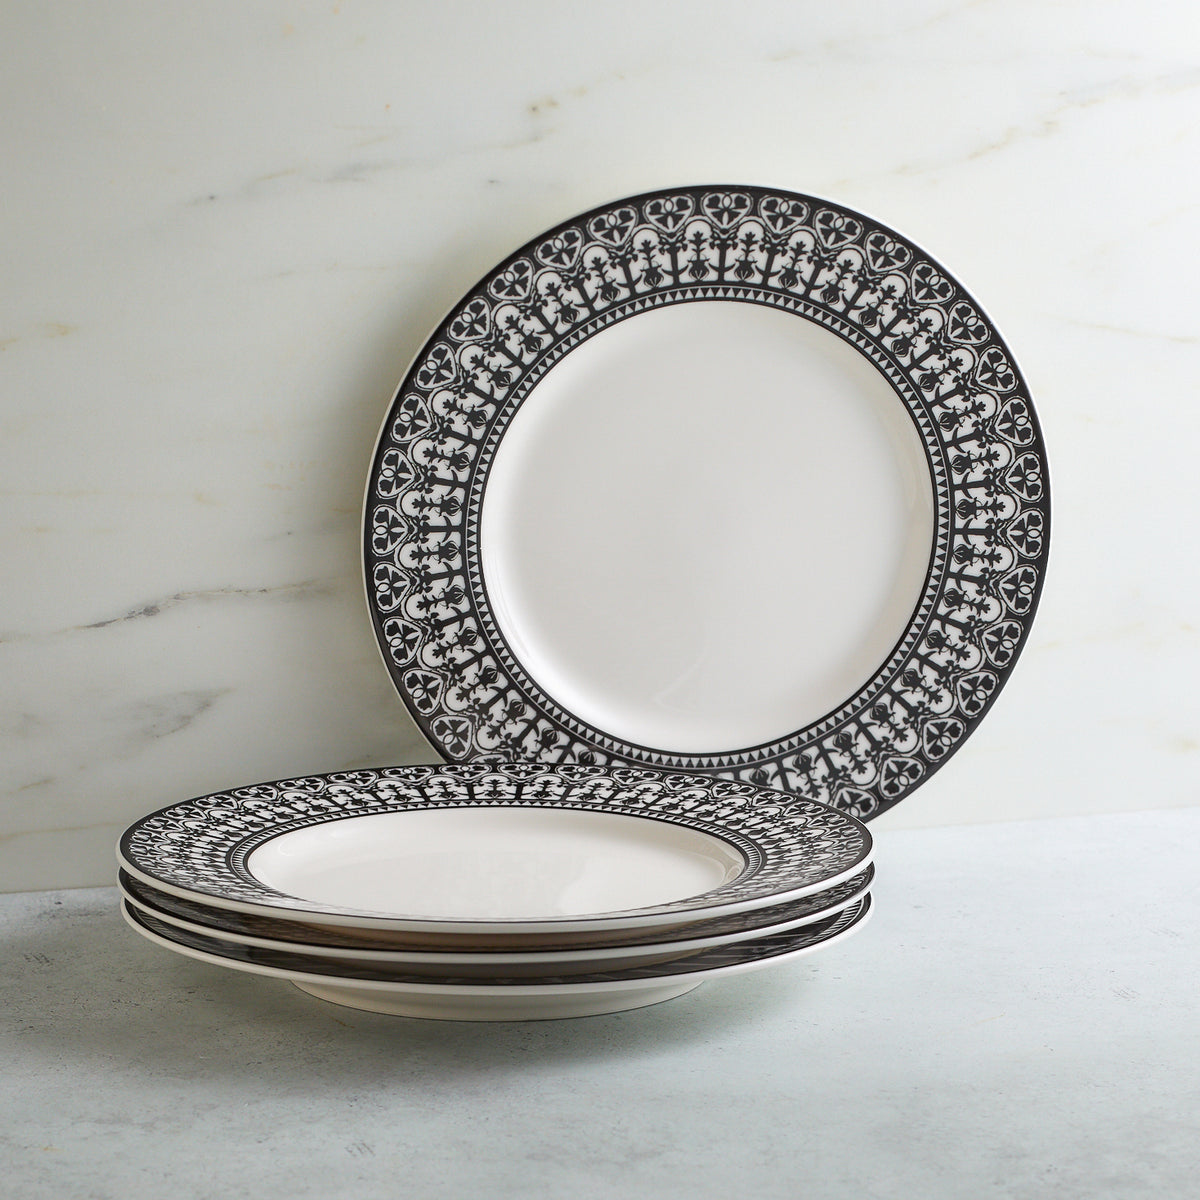 Four Casablanca Rimmed Salad Plates made of lead-free porcelain, with intricate black floral designs on the rims, stacked with one plate resting upright against a white marble backdrop. These pieces feature exquisite hand decorated details from Caskata Artisanal Home.